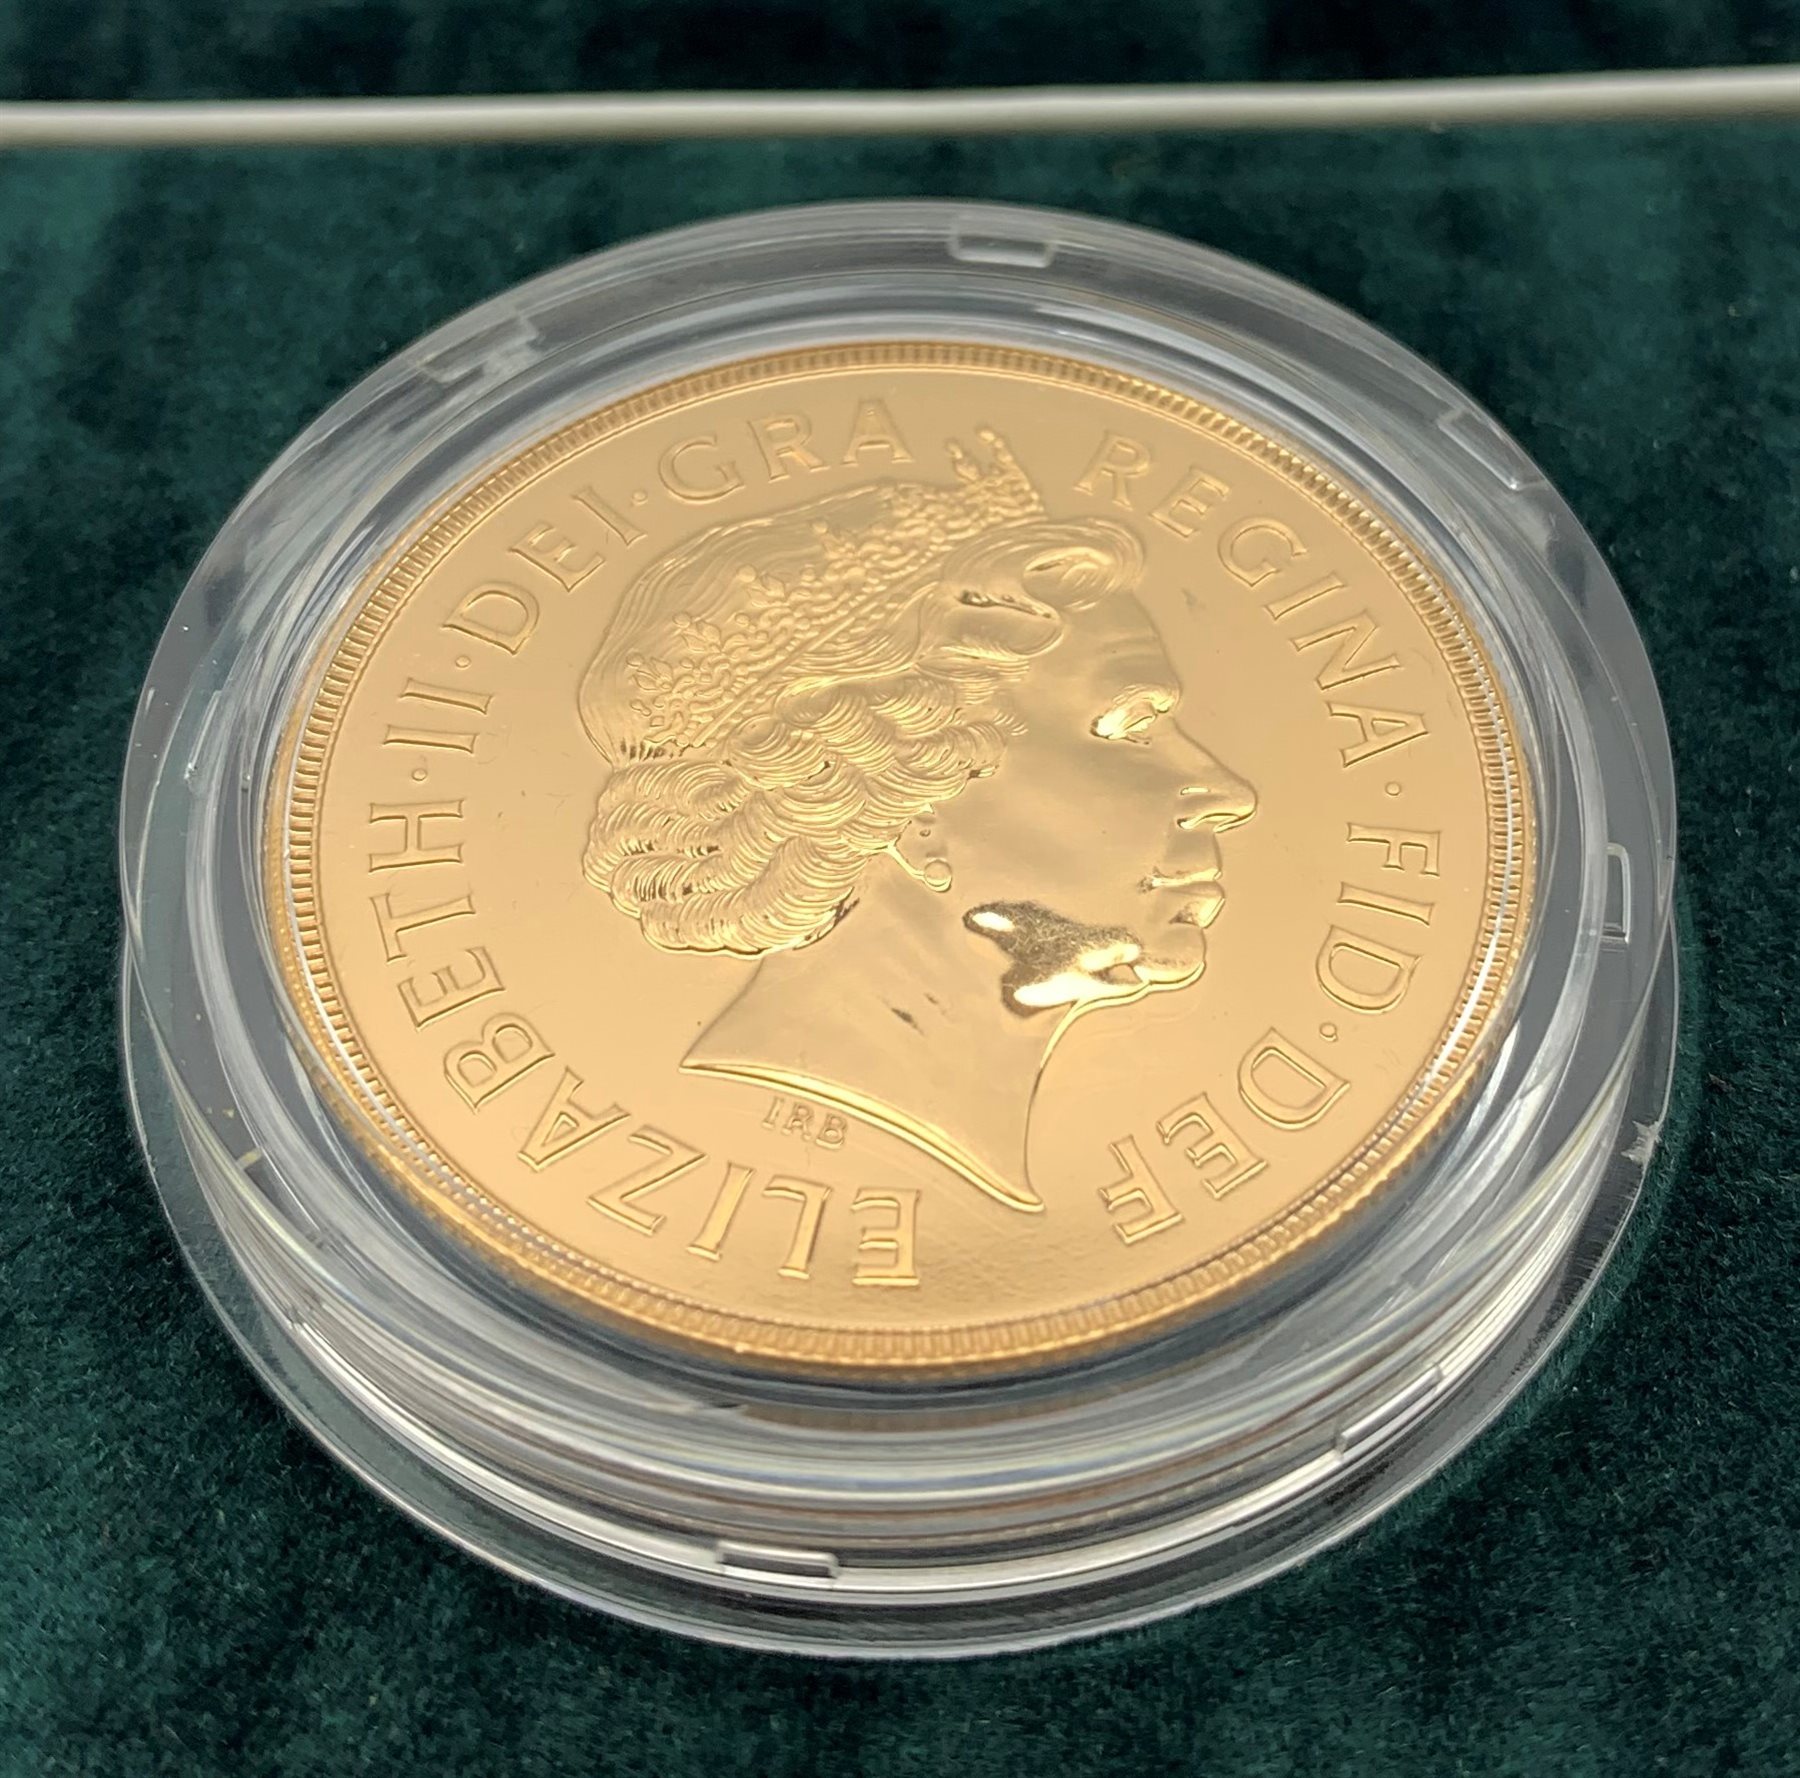 Queen Elizabeth II 1998 brilliant uncirculated gold five pound coin, cased with certificate - Image 2 of 3